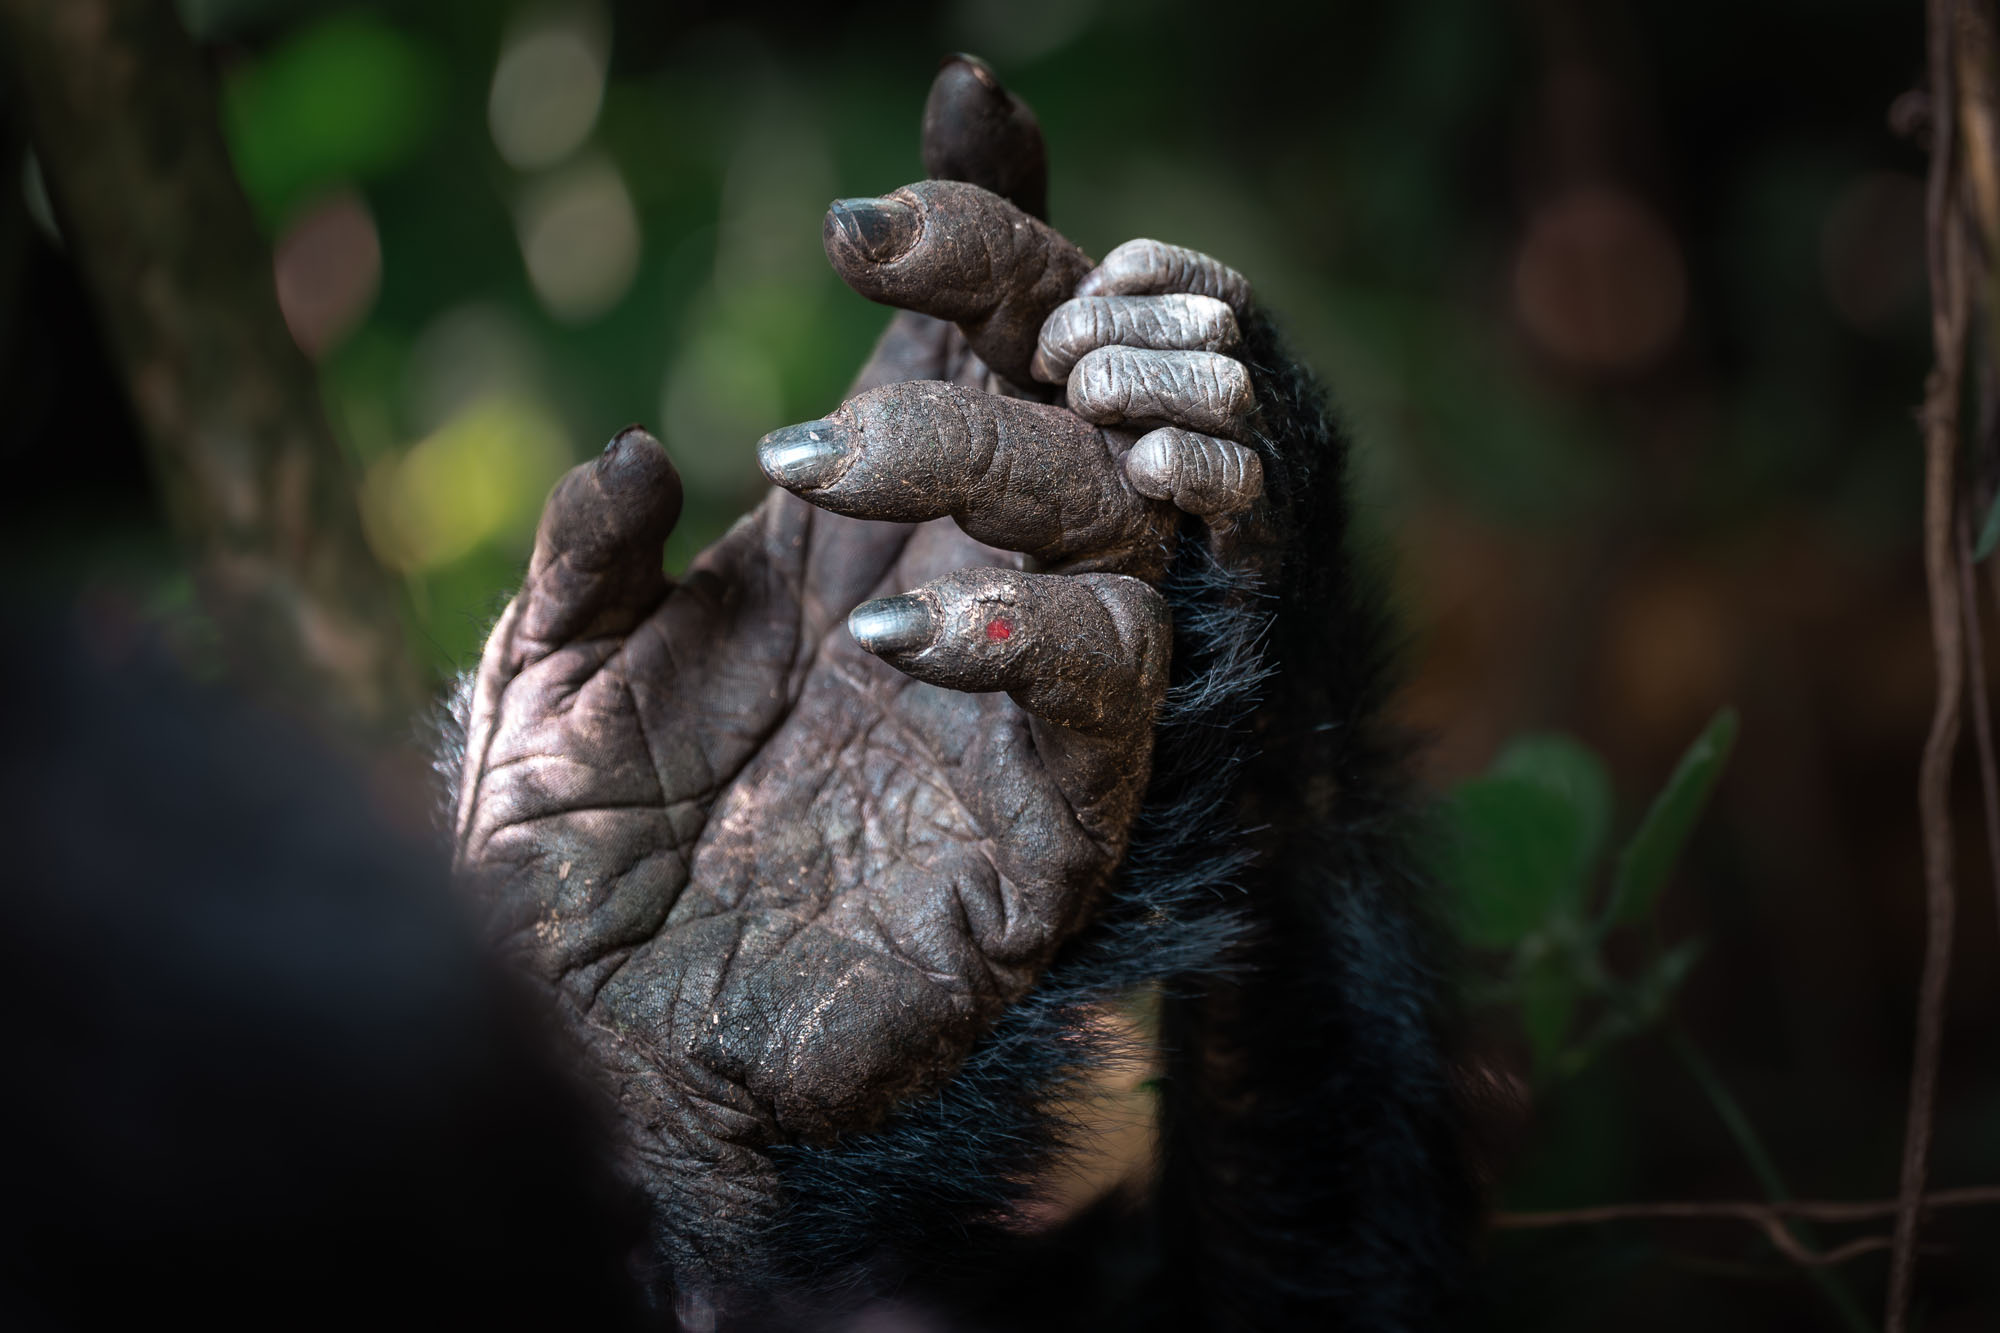 The hands of a mother and an infant gorilla, seen in the Bwindi Impenetrable Forest, Uganda